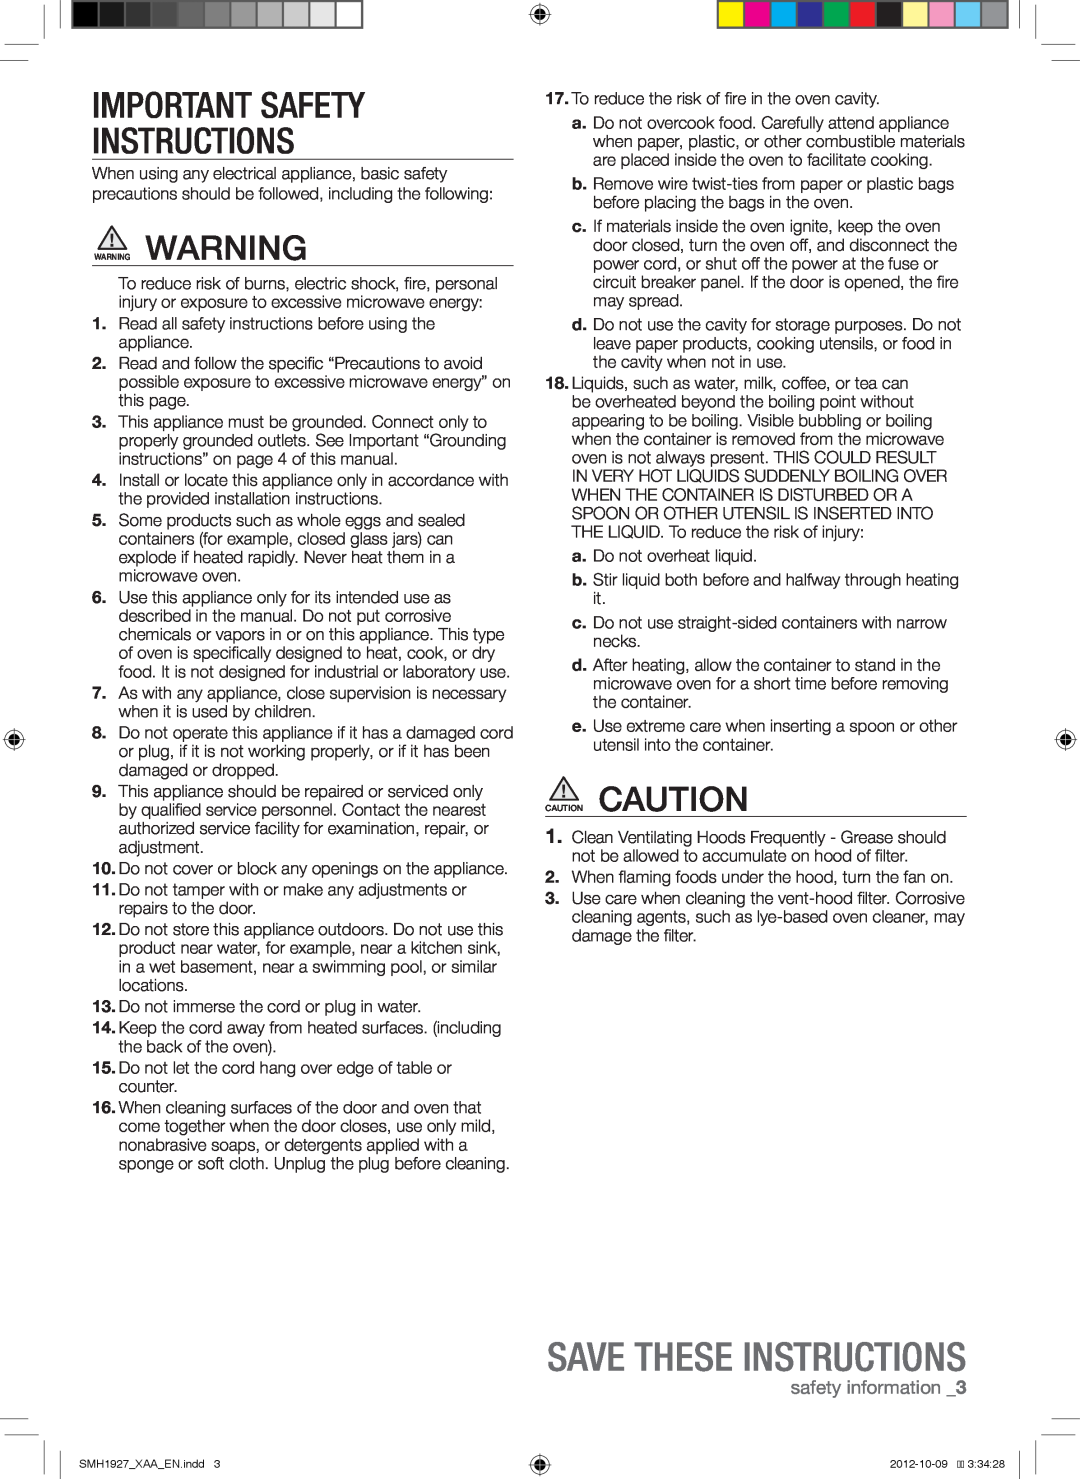 Samsung SMH1927S, SMH1927W, SMH1927B Save These Instructions, Important Safety Instructions, safety information 